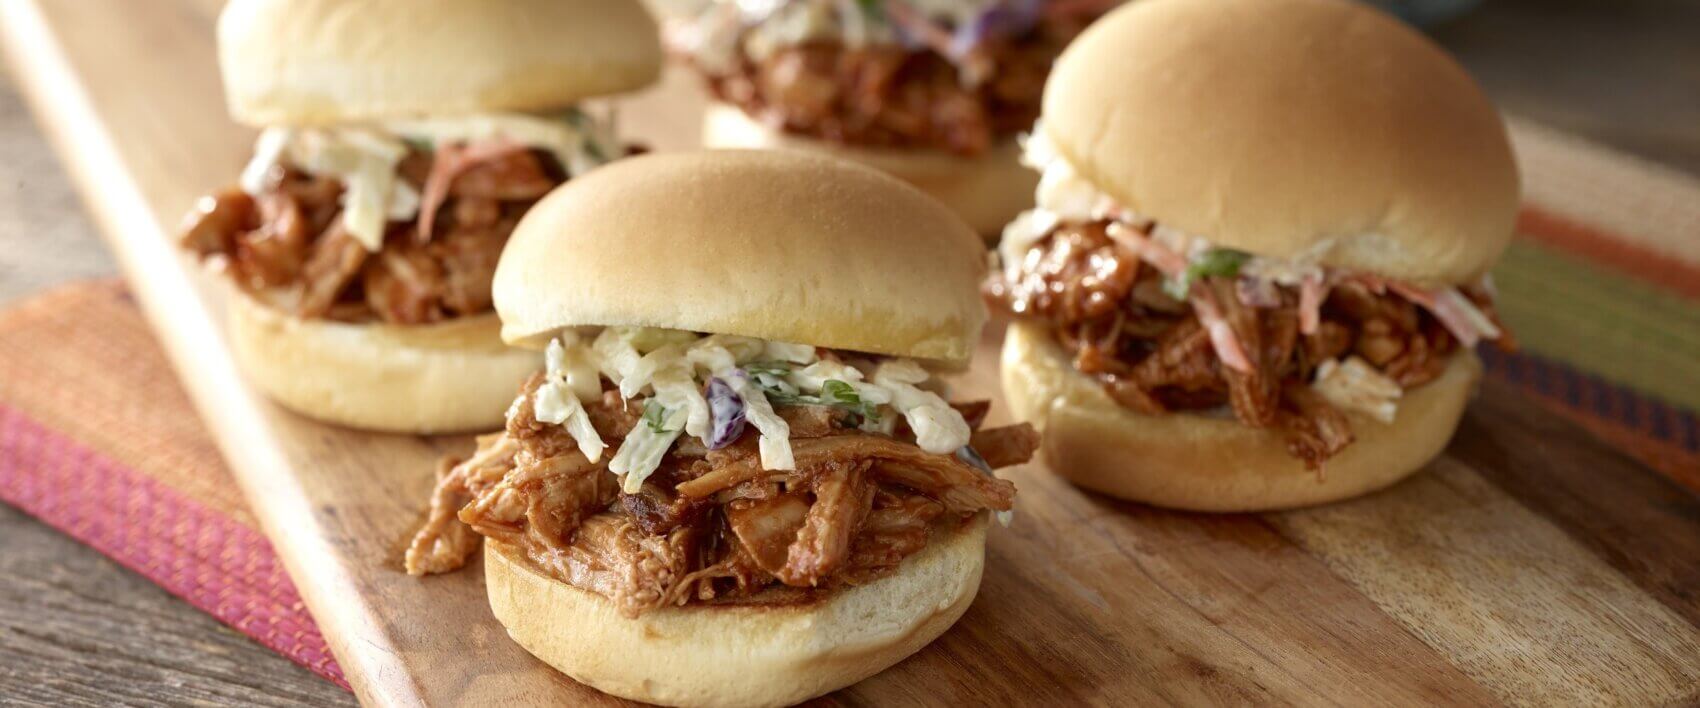 Pulled Pork Sliders with Slaw - HORMEL® Marinated Meats